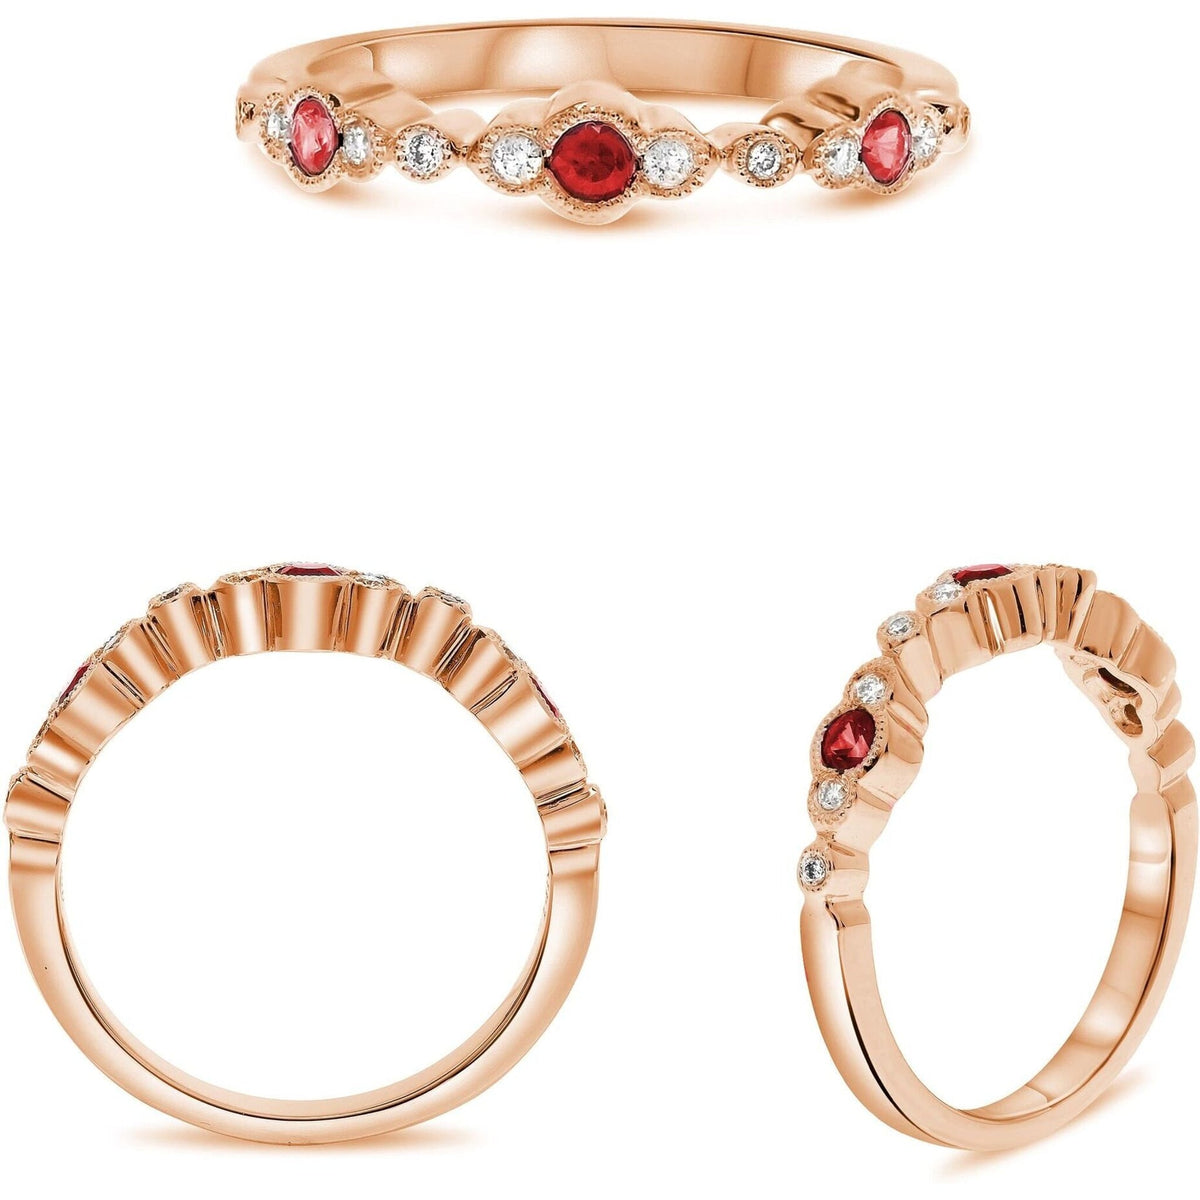 Elegant Ruby and Rose Gold Halo Ring by Roman Jules